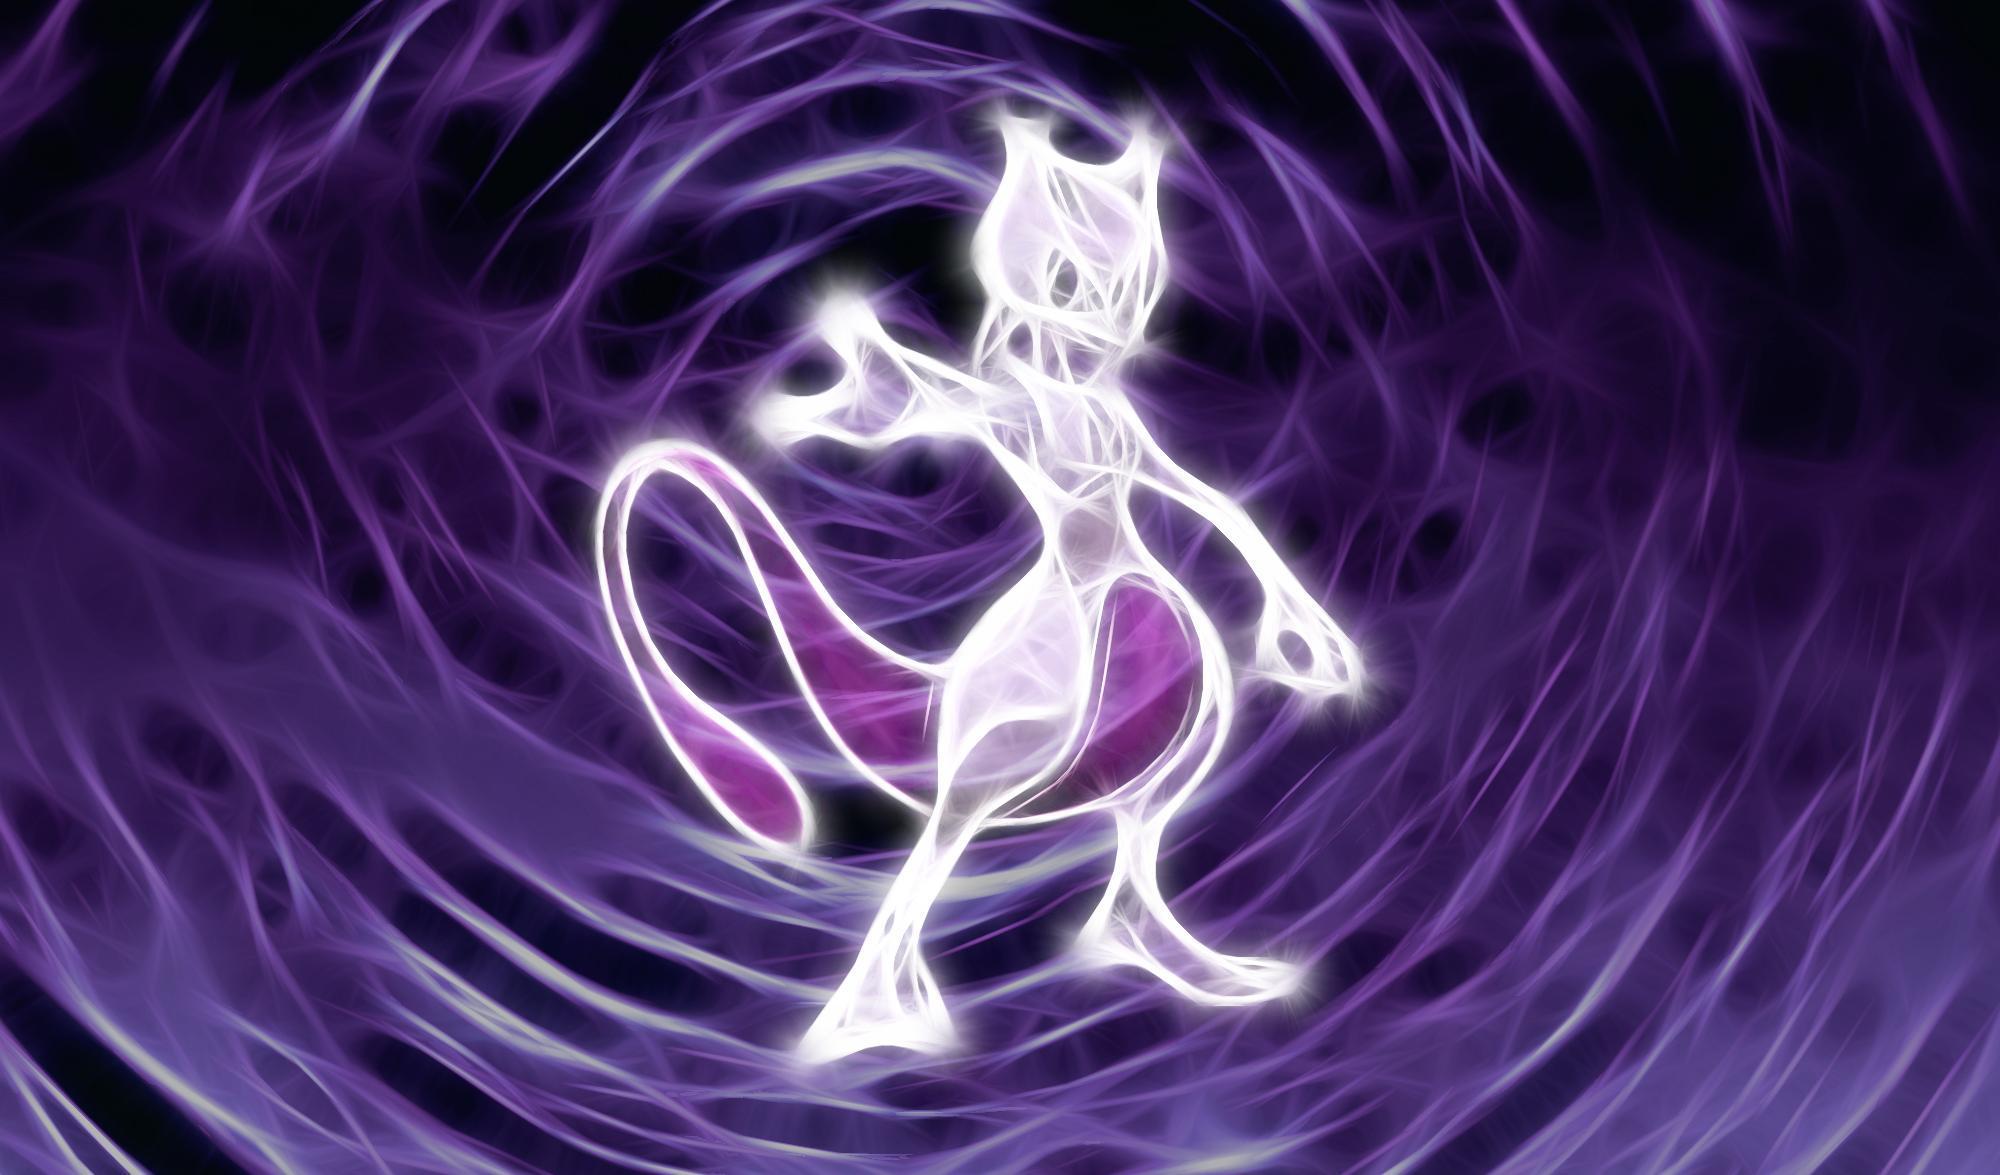 image For > Mew And Mewtwo Pokemon Wallpaper